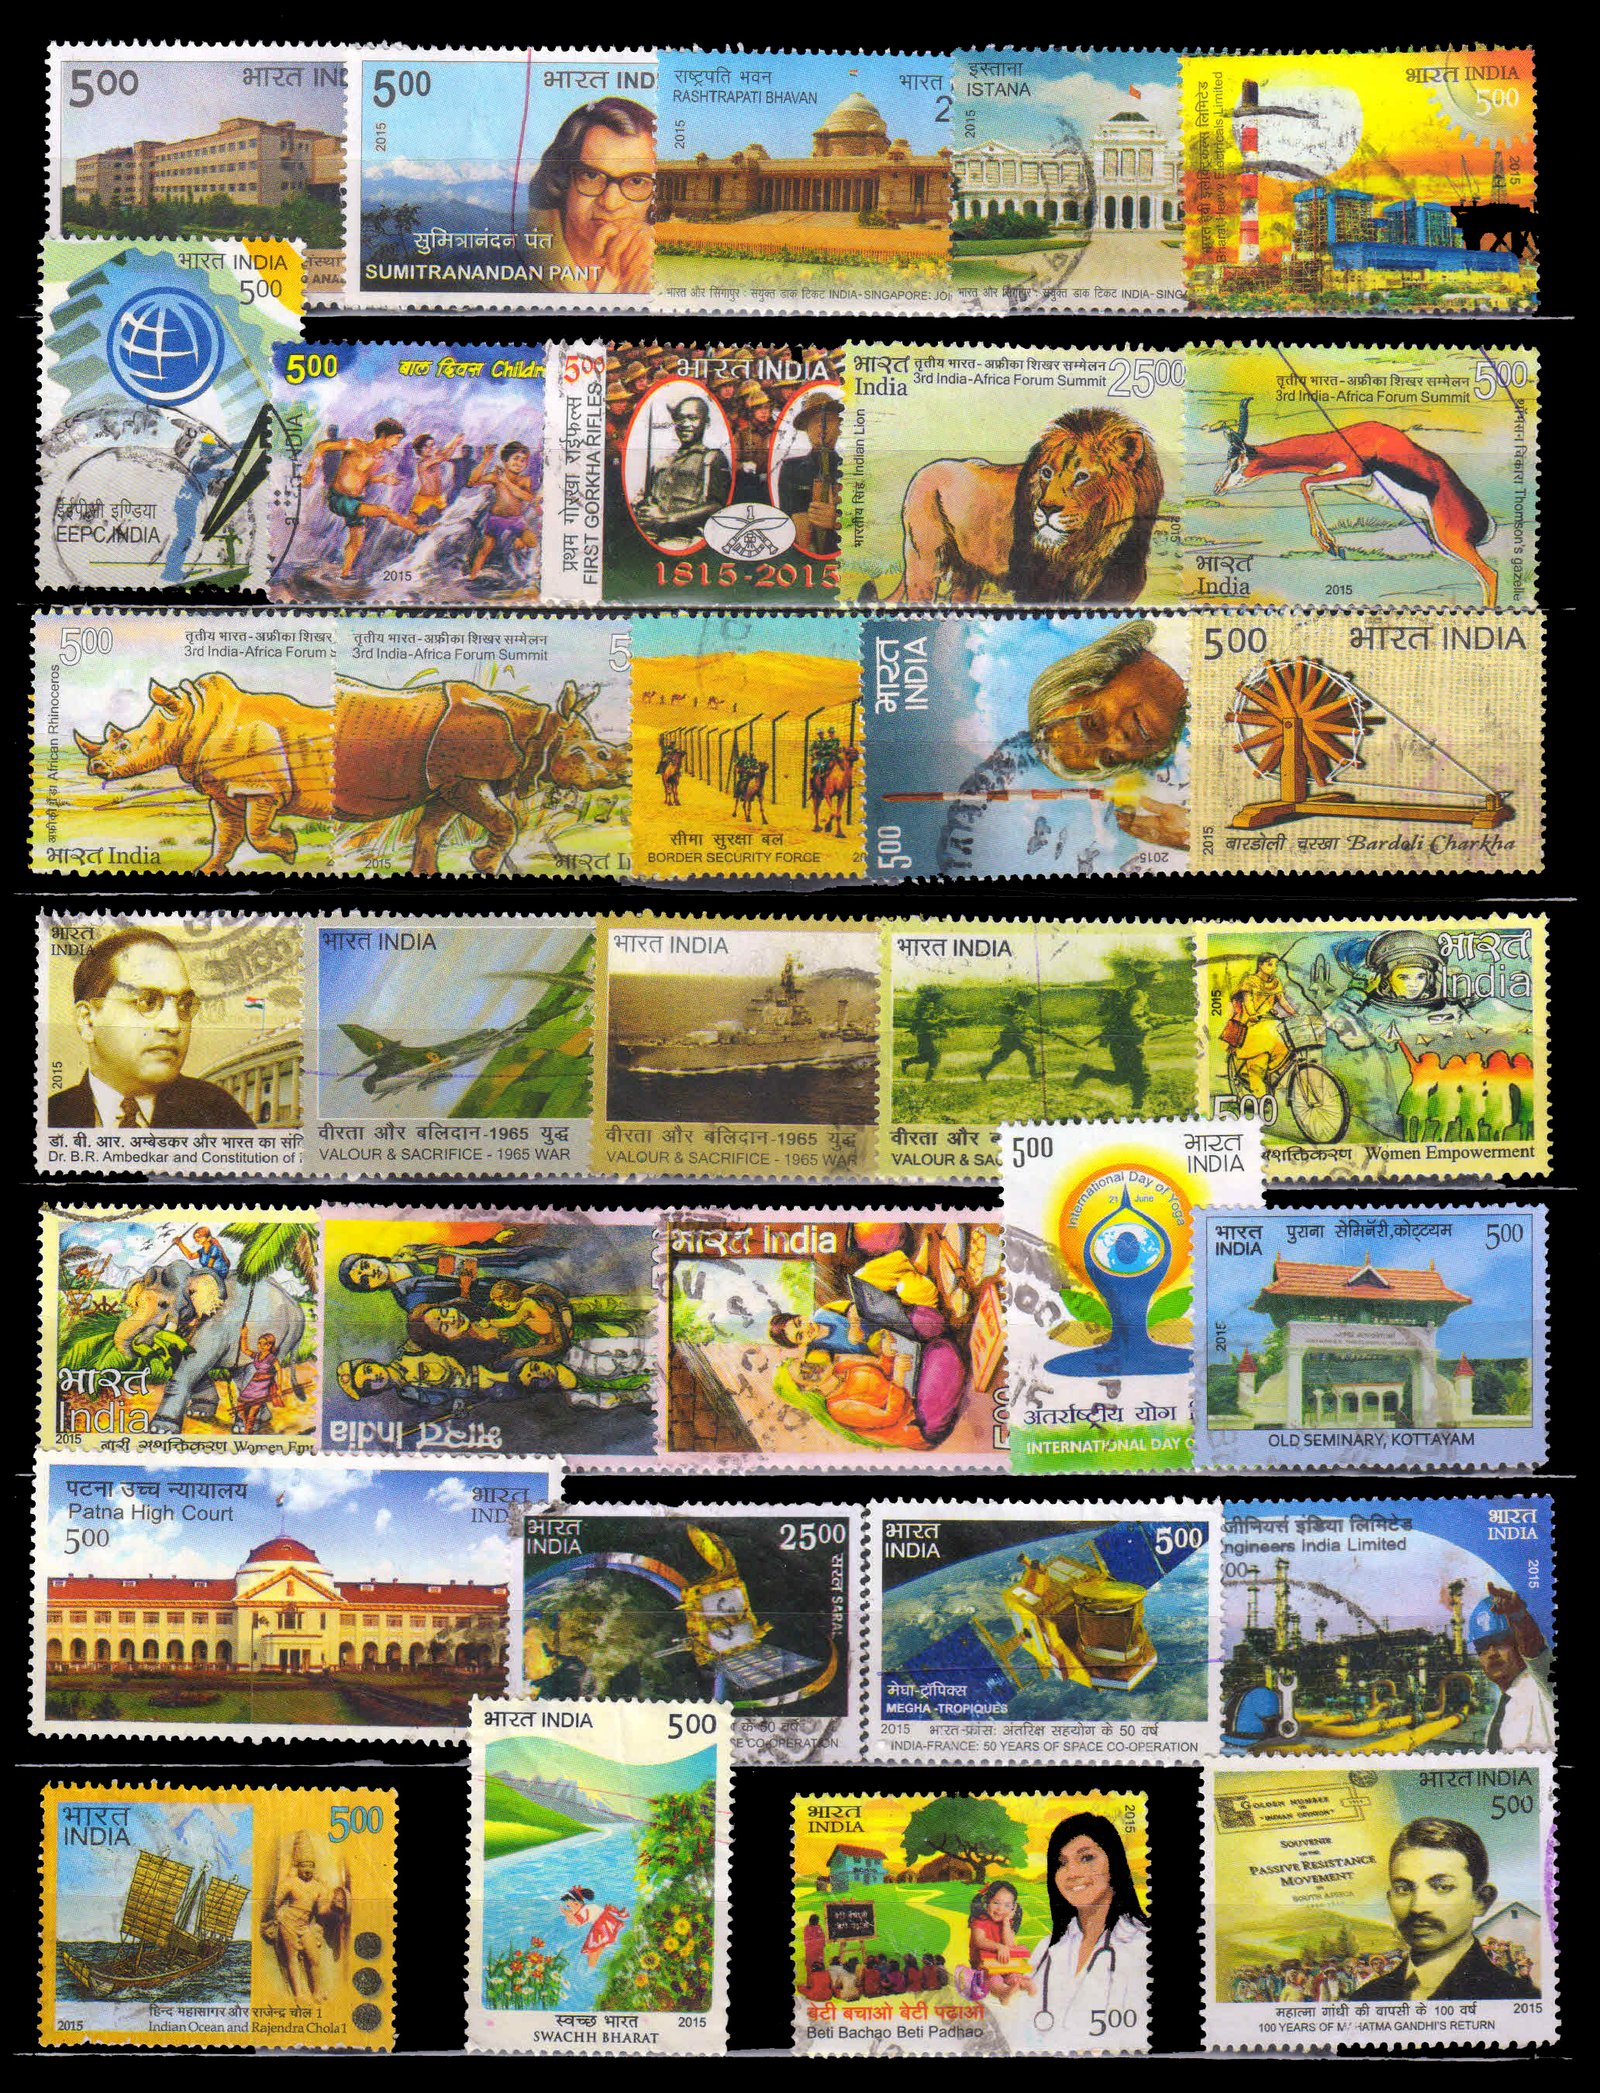 INDIA YEAR UNIT 2015, Set of 33 Used Stamps